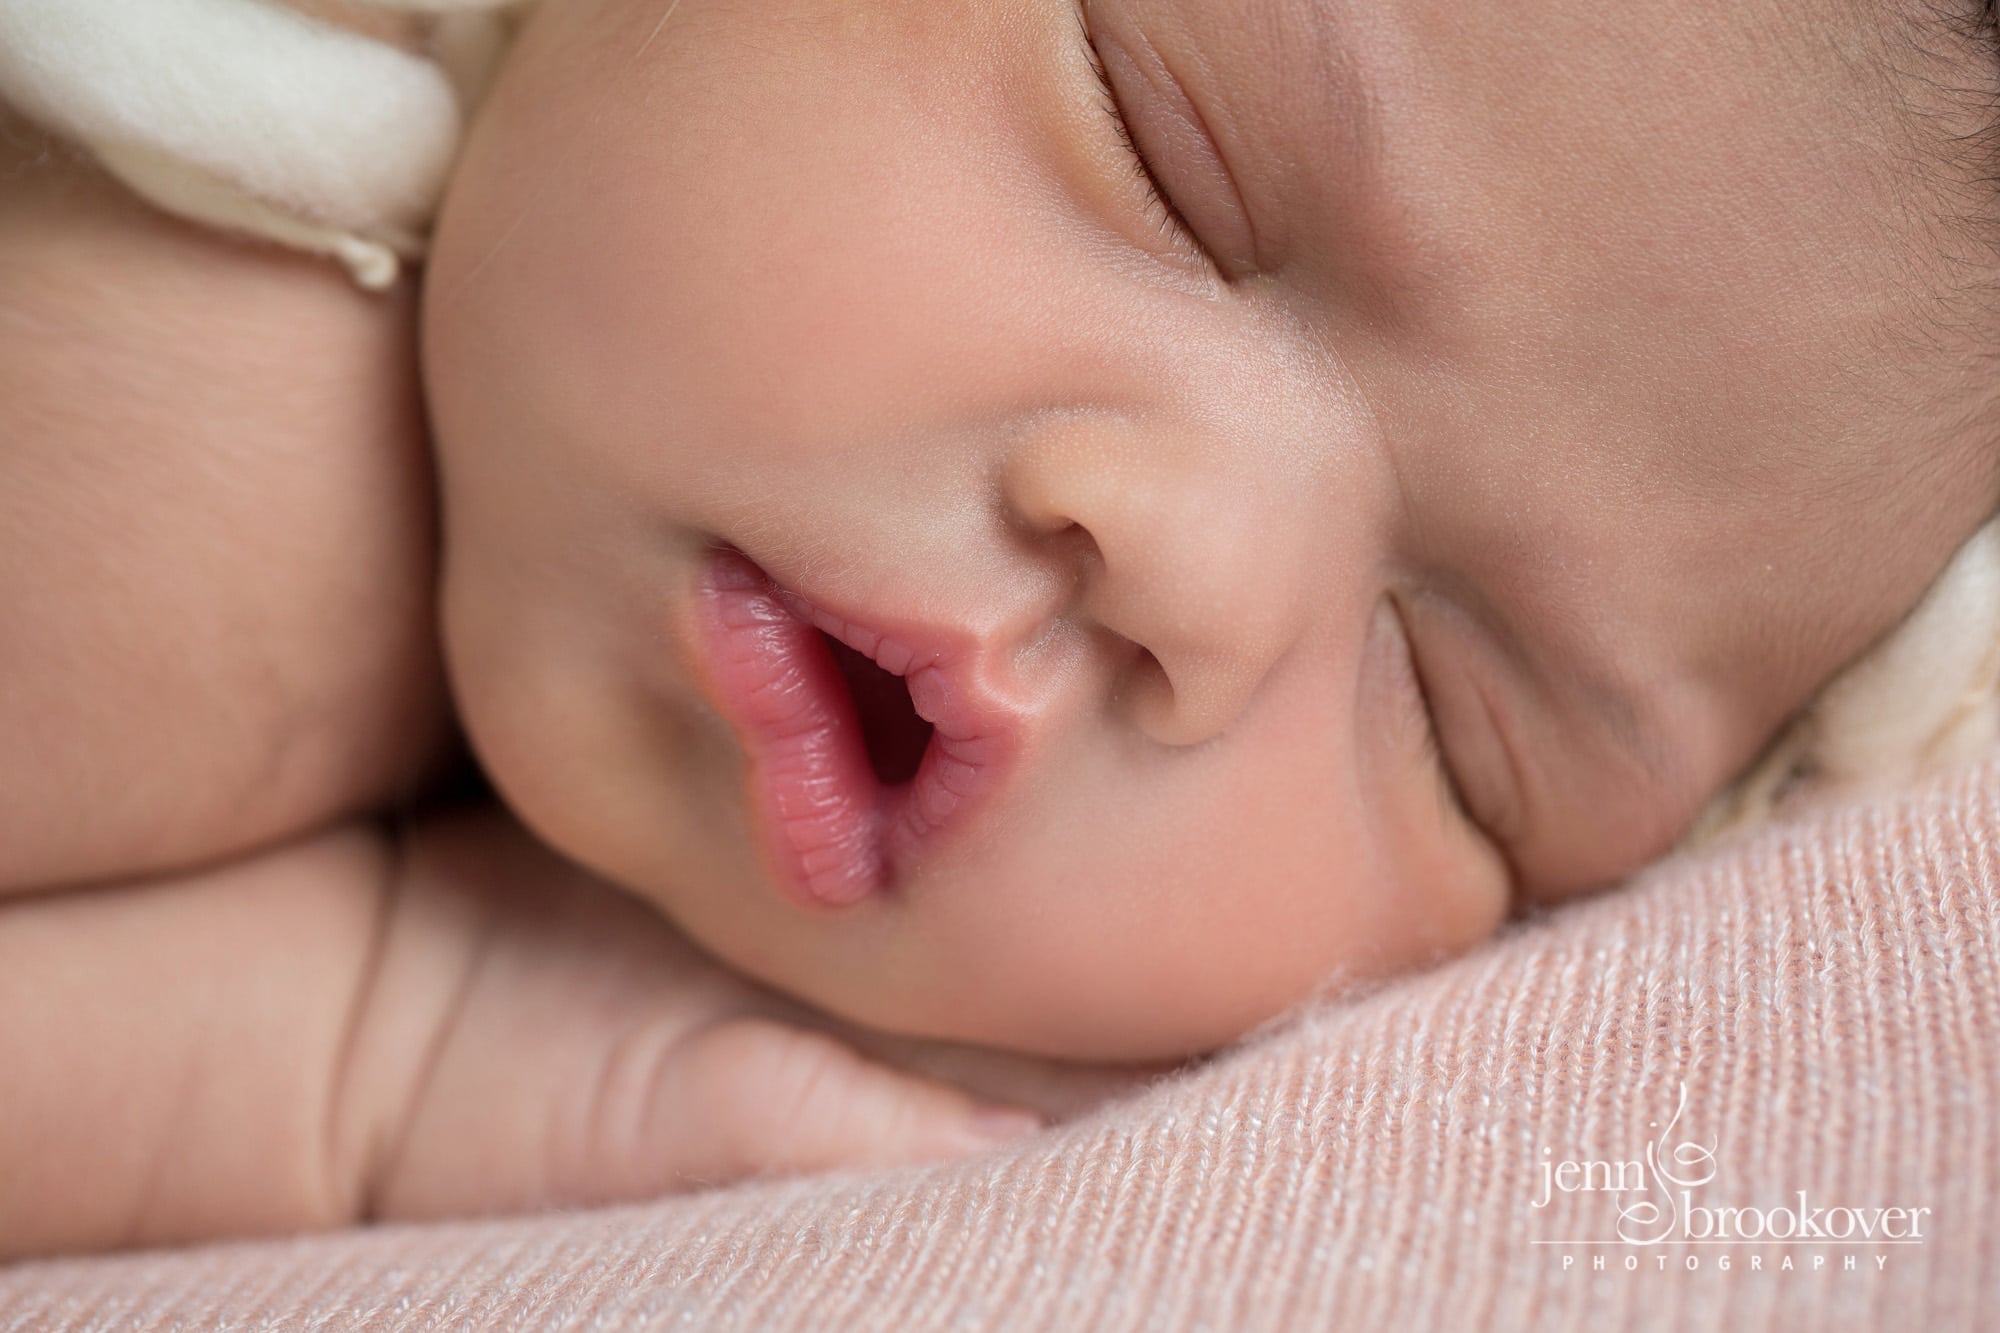 perfect shot of baby lips taken during baby girl newborn session with Jenn Brookover Photography in San Antonio, Texas